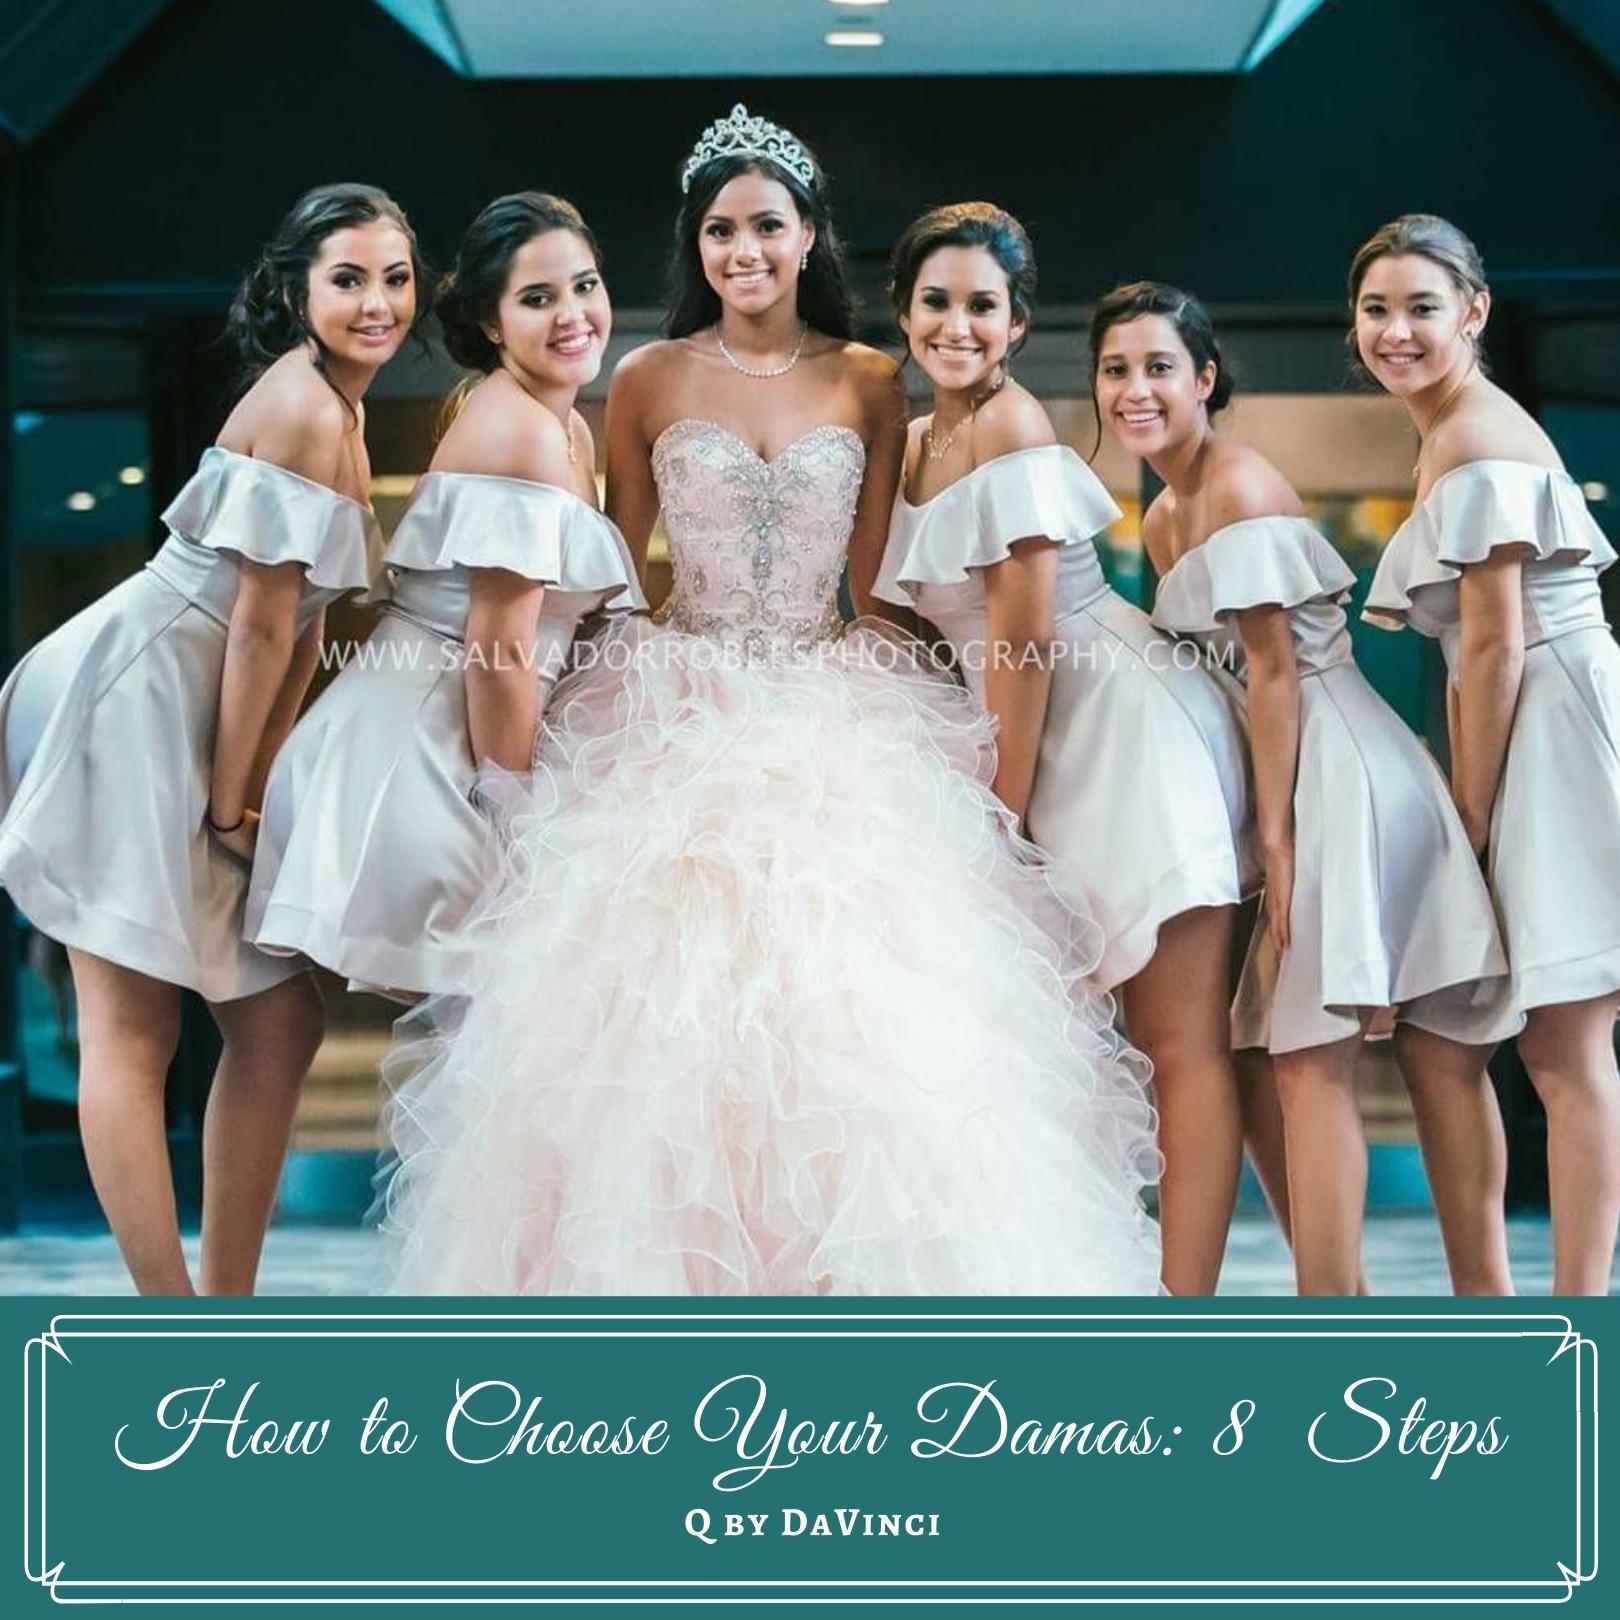 How to Choose Your Damas: 8 Steps - Q by DaVinci